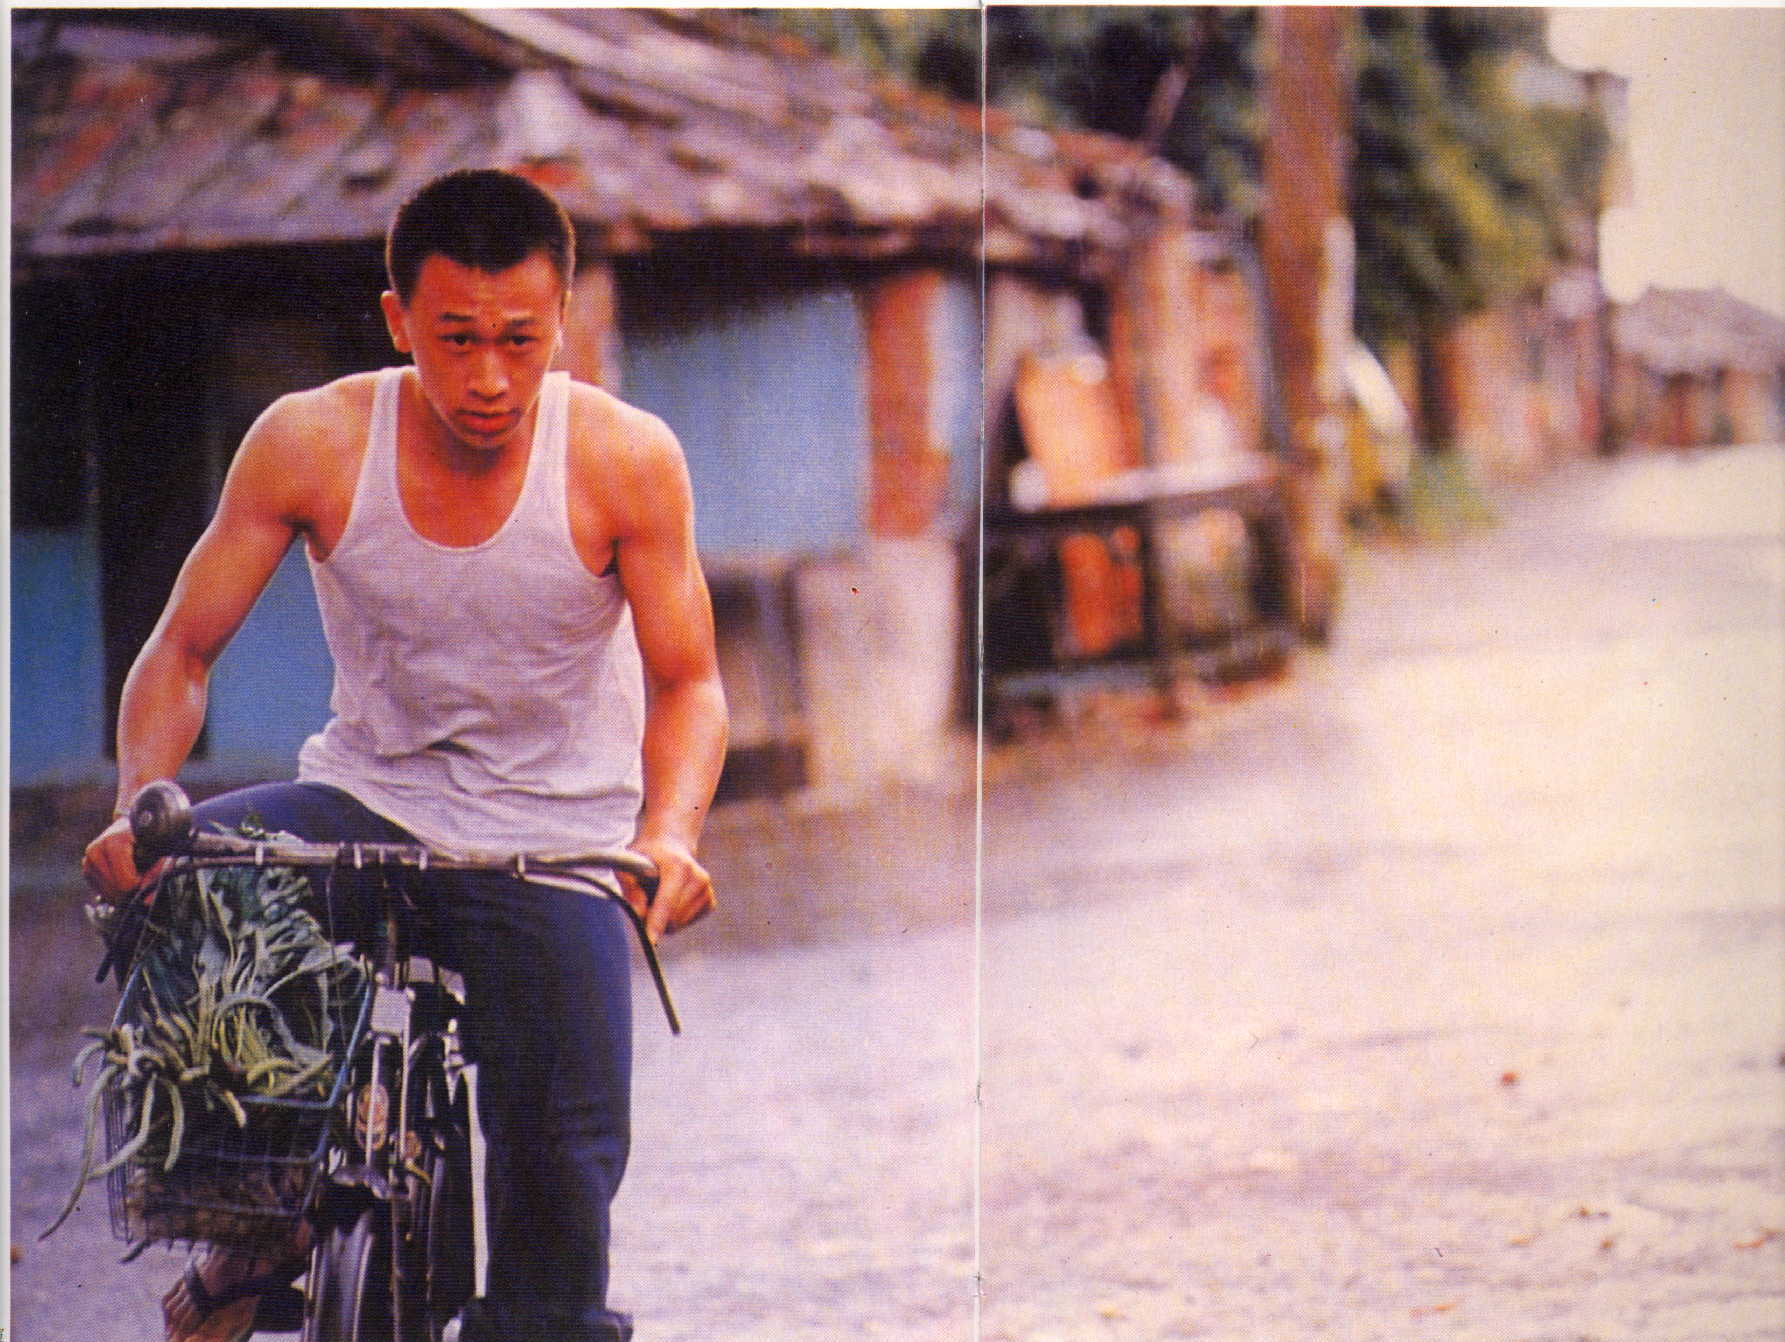 THE TIME TO LIVE AND THE TIME TO DIE (1985). FILM REVIEW. 'A CENTURY OF CHINESE CINEMA' AT BFI